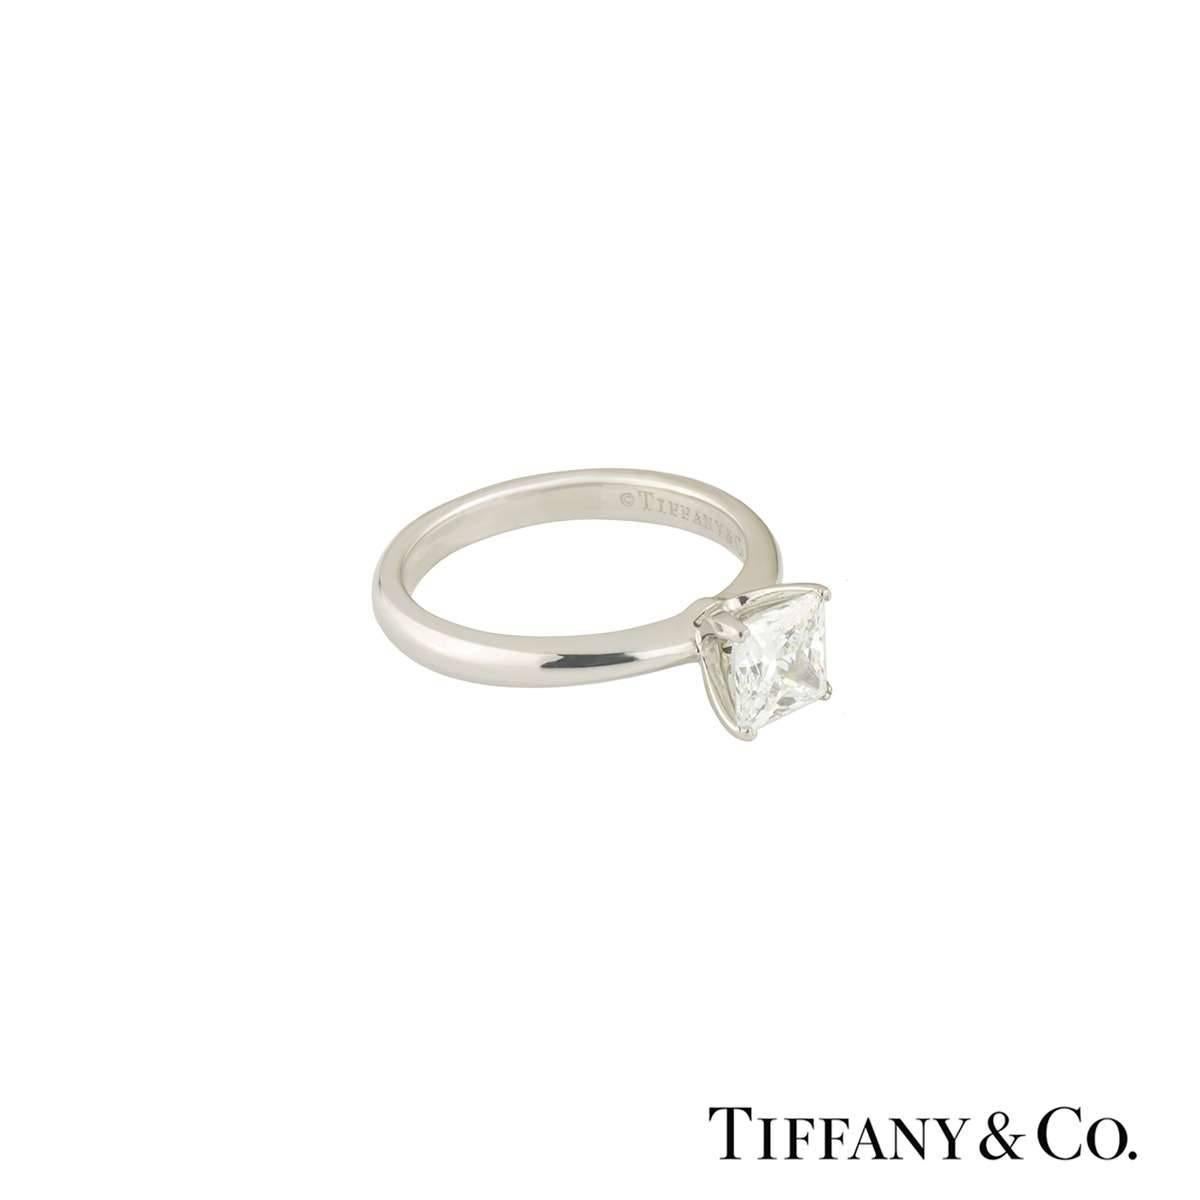 A beautiful platinum diamond Tiffany & Co. ring from the princess cut collection. The ring comprises of a princess cut diamond in a 4 claw setting with a total weight of 1.05ct, G colour and VVS2 clarity. The ring is set in a court fit band and is a